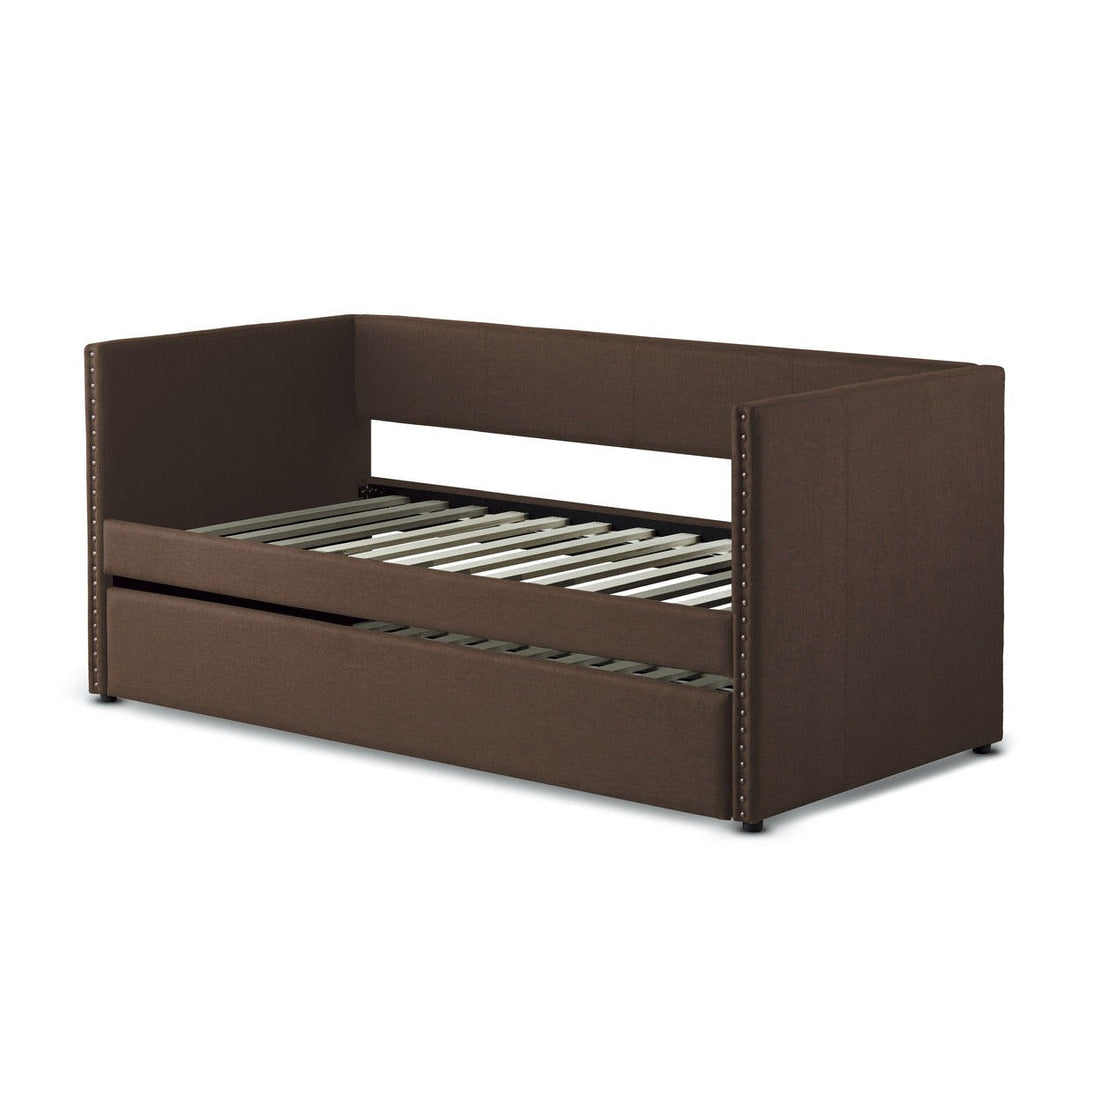 (2) DAYBED, CHOCOLATE 4969CH*